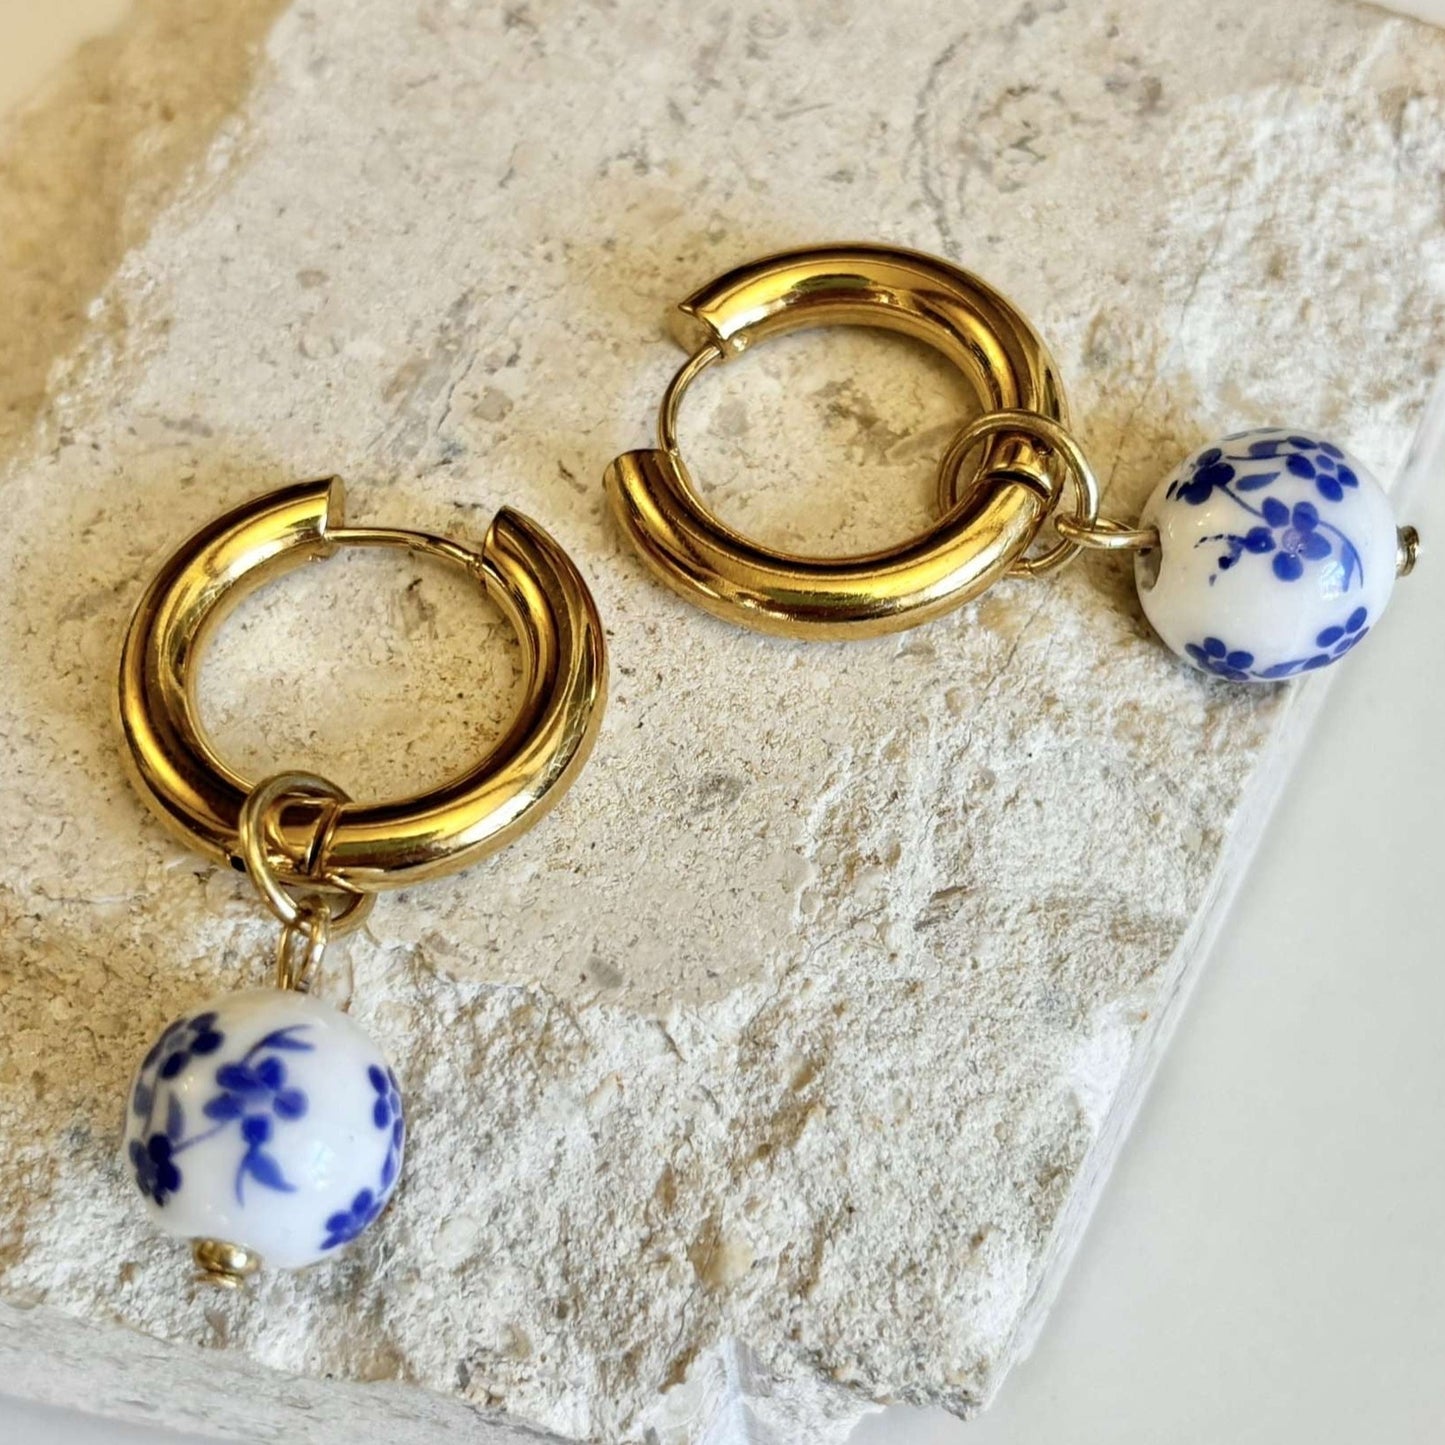 Blue and White Floral Porcelain Earrings